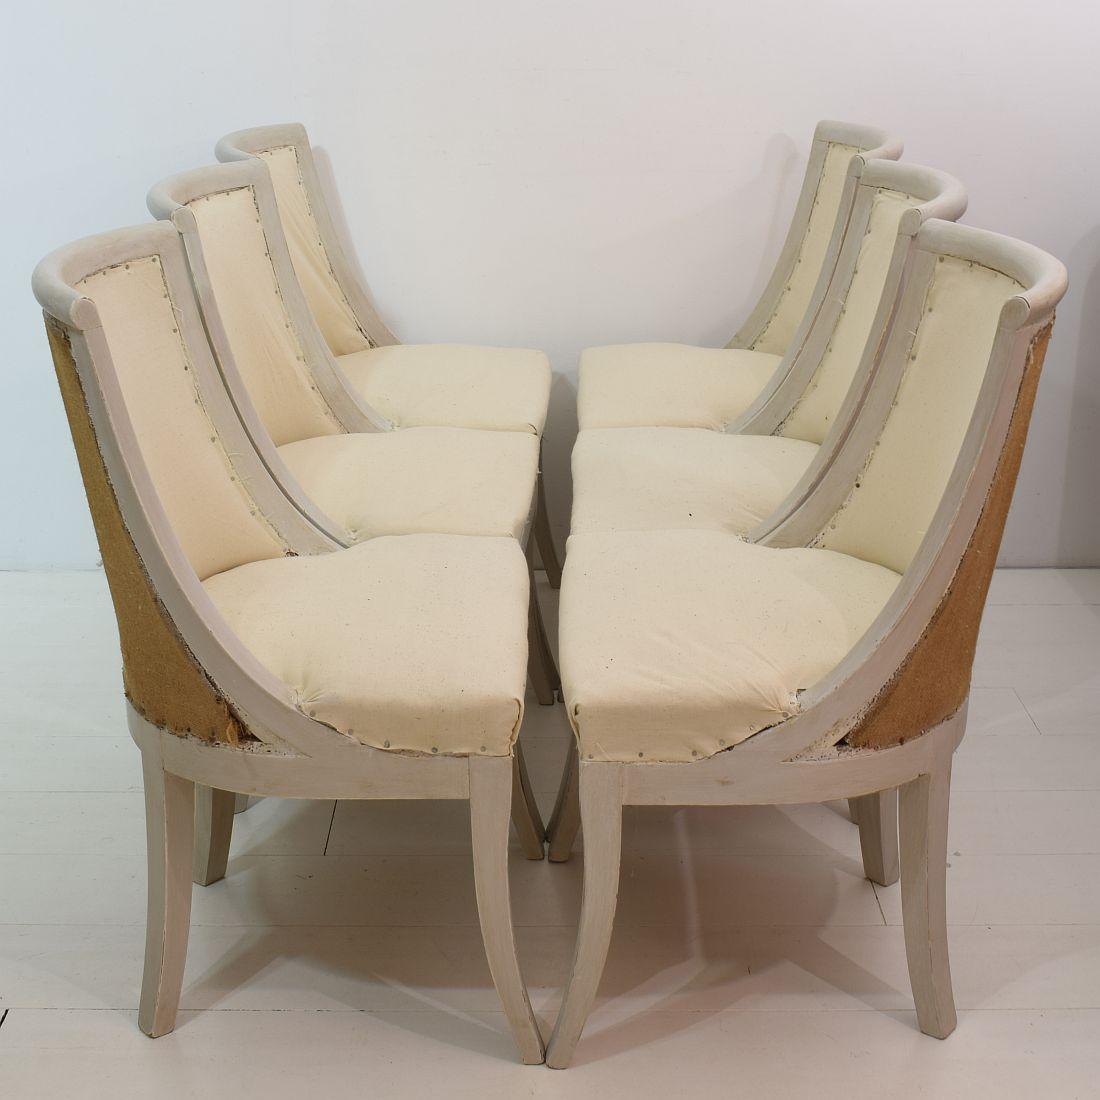 Empire Revival Set of Six, 19th Century, French Empire Gondola Chairs